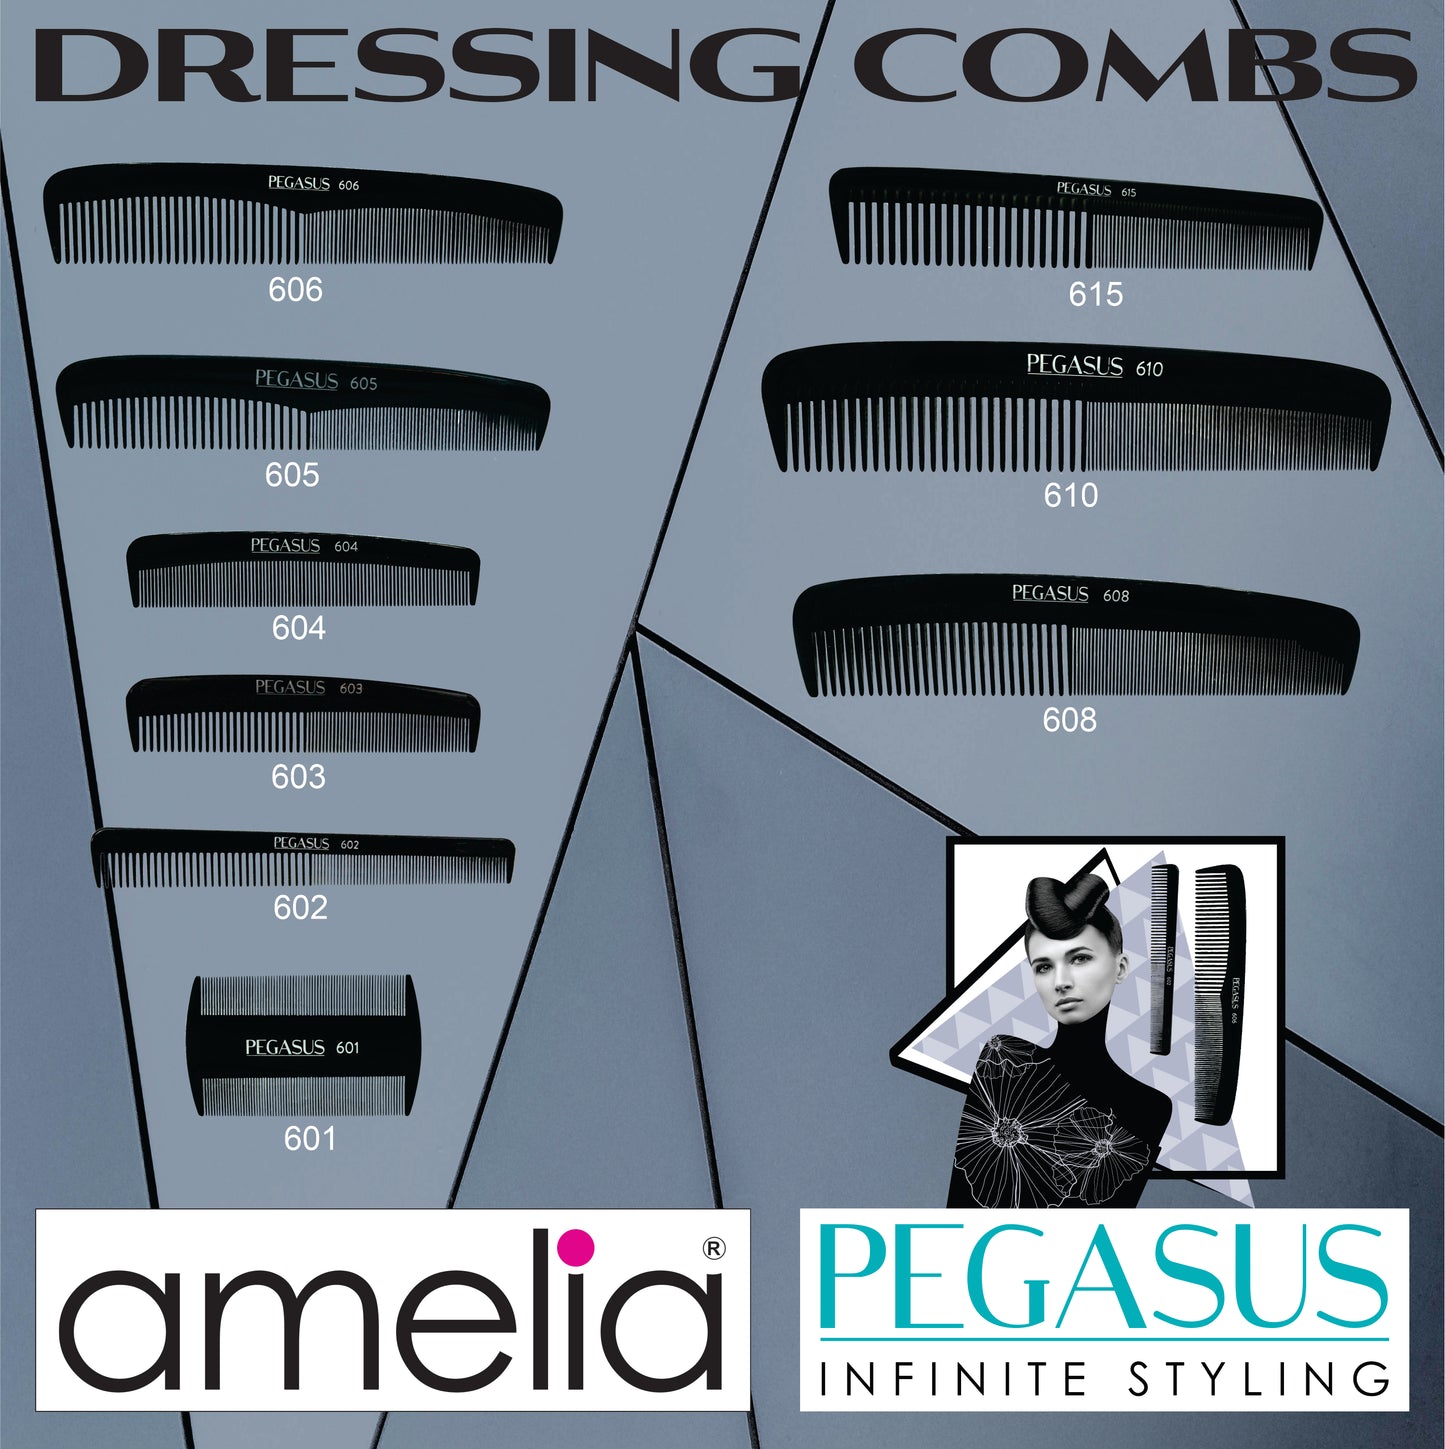 Pegasus 610, 9in Hard Rubber Heavy Styling Comb, Handmade, Seamless, Smooth Edges, Anti Static, Heat and Chemically Resistant, Portable Pocket Purse Dresser Comb | Peines de goma dura - Black